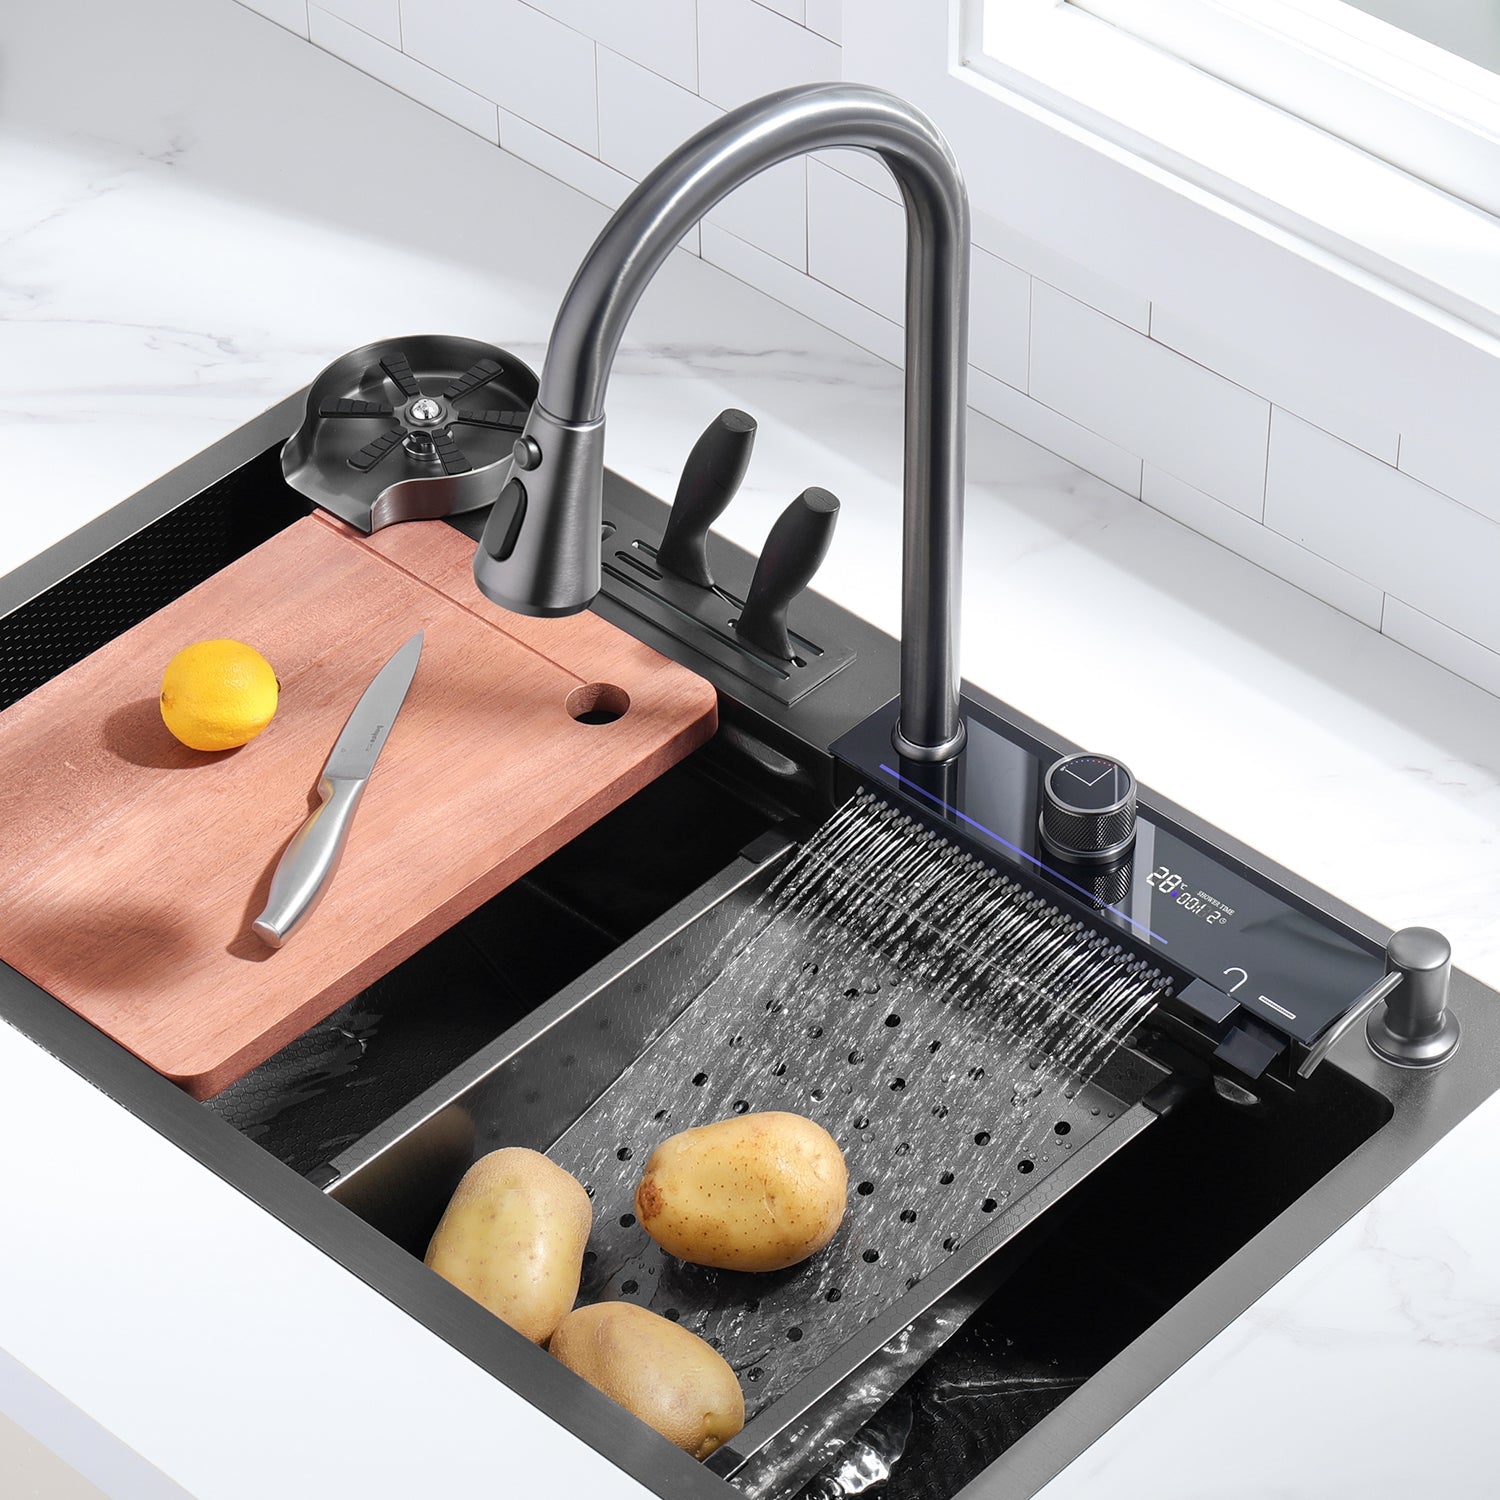 Lefton Latest Waterfall Workstation Kitchen Sink Set with LED Lighting Temperature Display